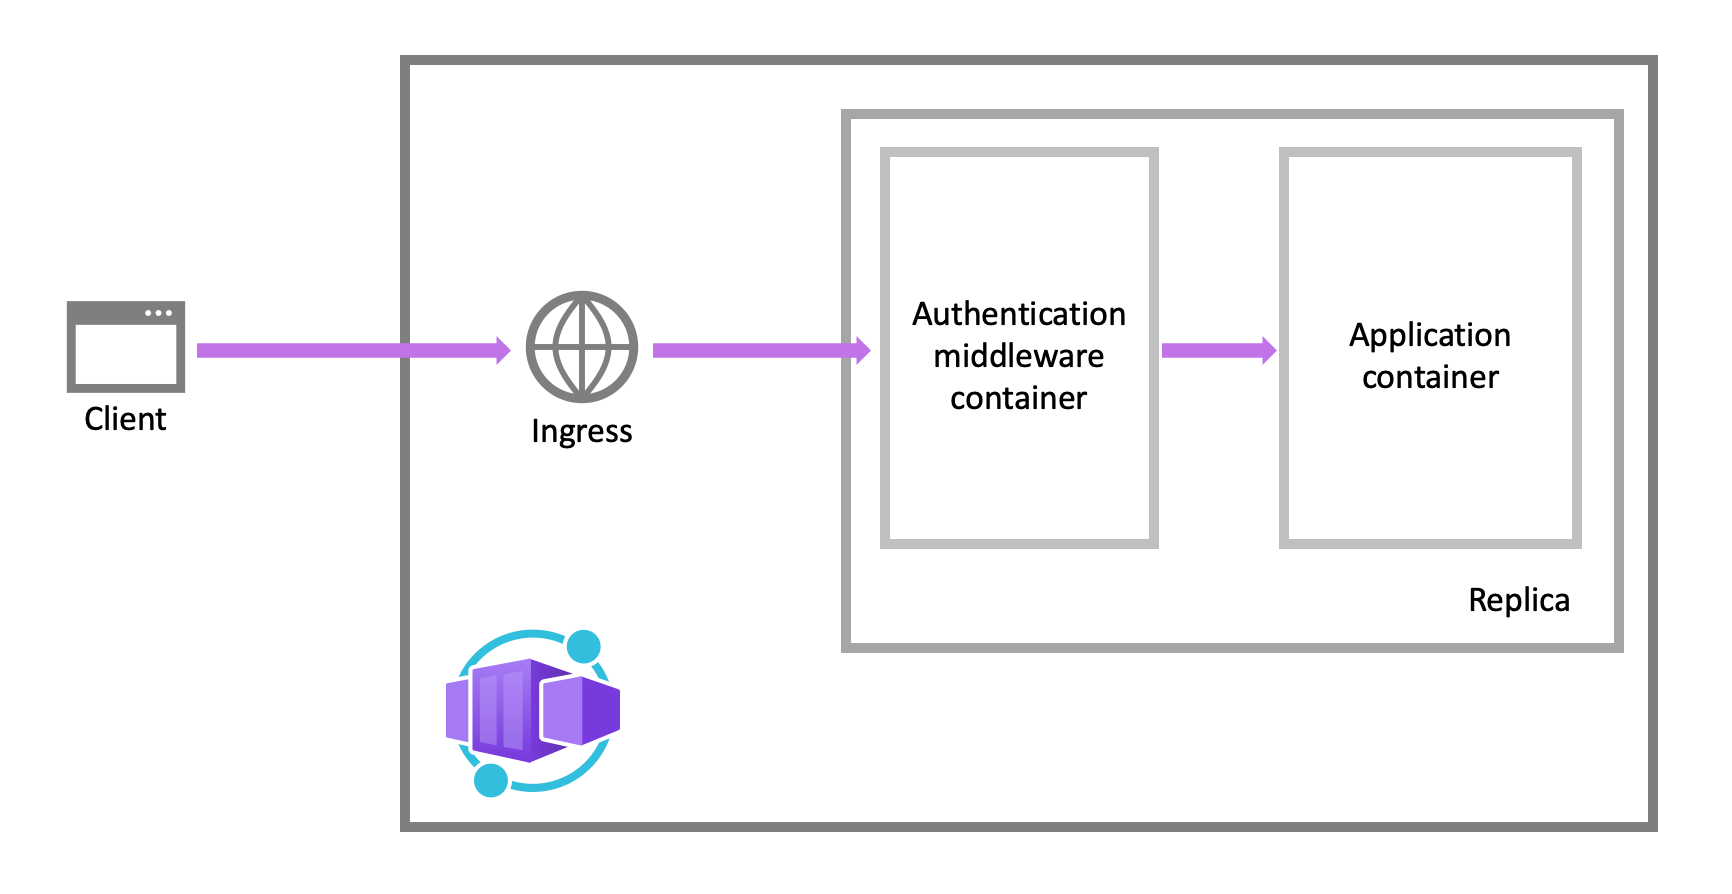 An architecture diagram showing requests being intercepted by a sidecar container which interacts with identity providers before allowing traffic to the app container